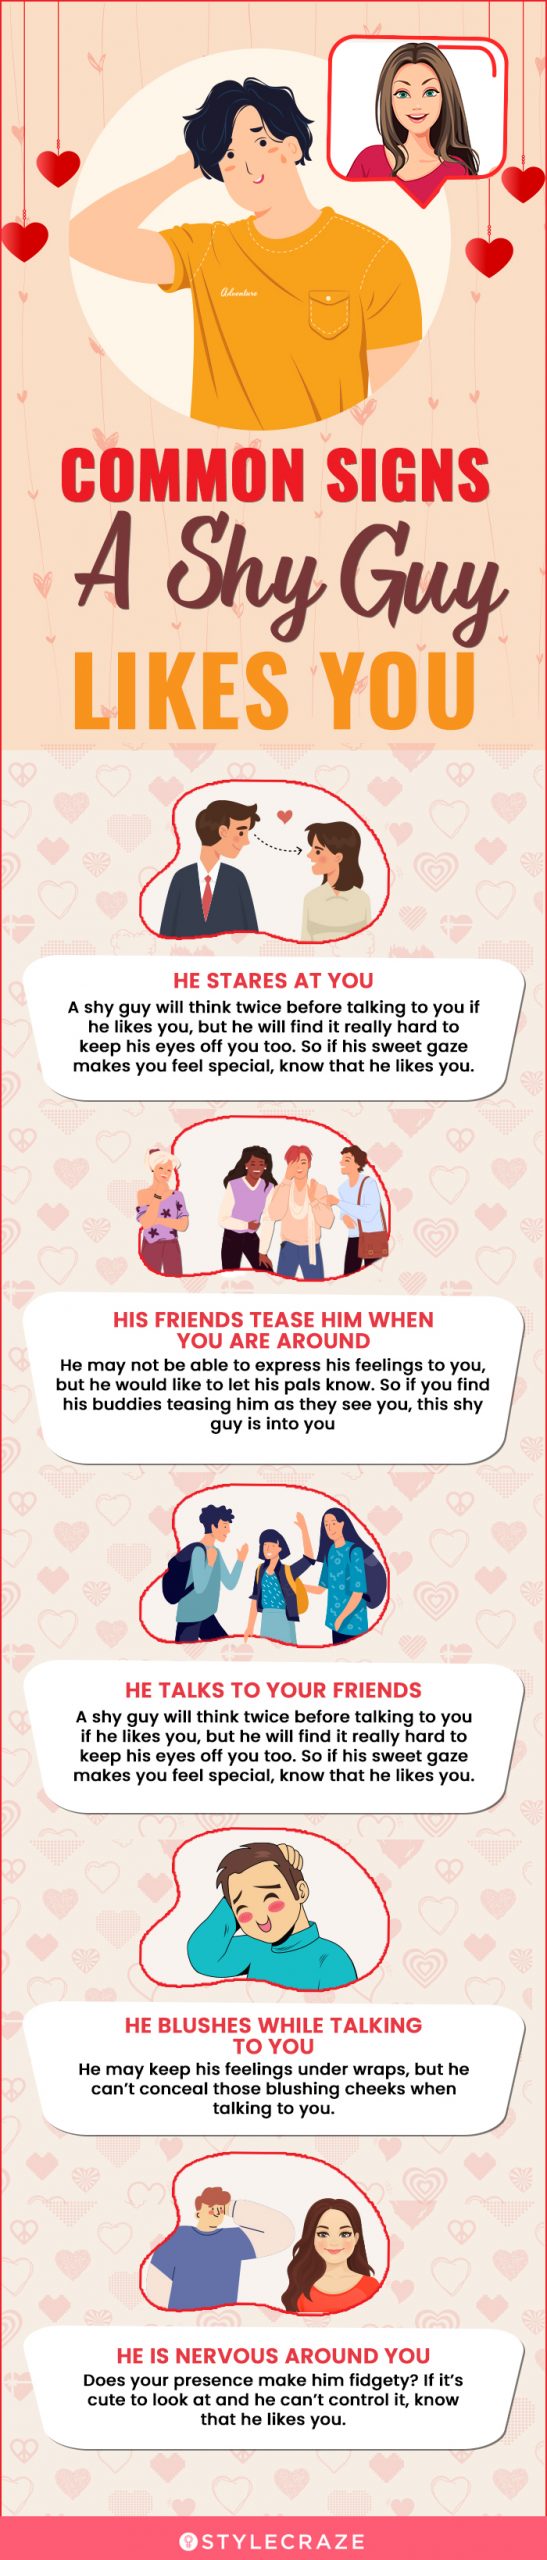 common signs a shy guy likes you (infographic)